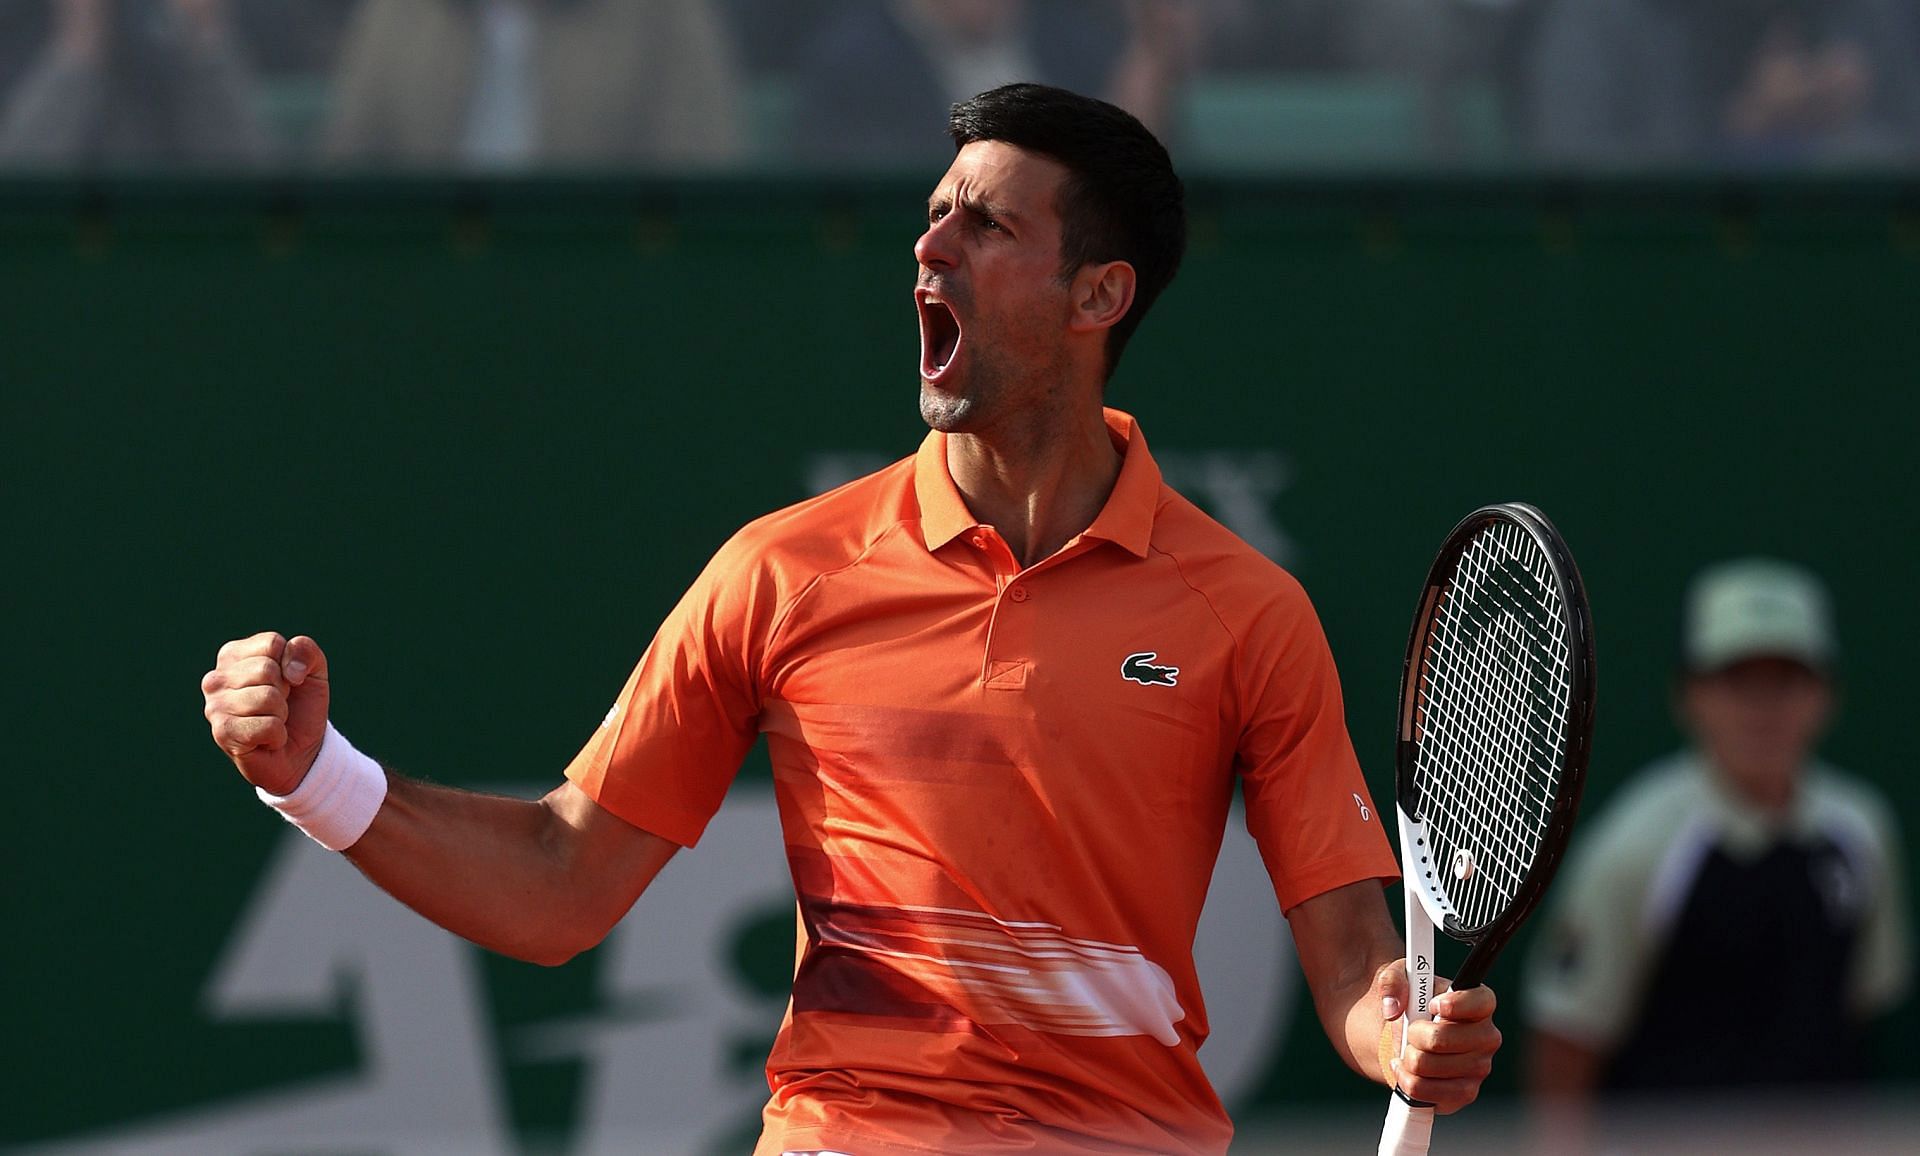 Novak Djokovic trailed by a set and a break for the second match in a row in the Serbia Open